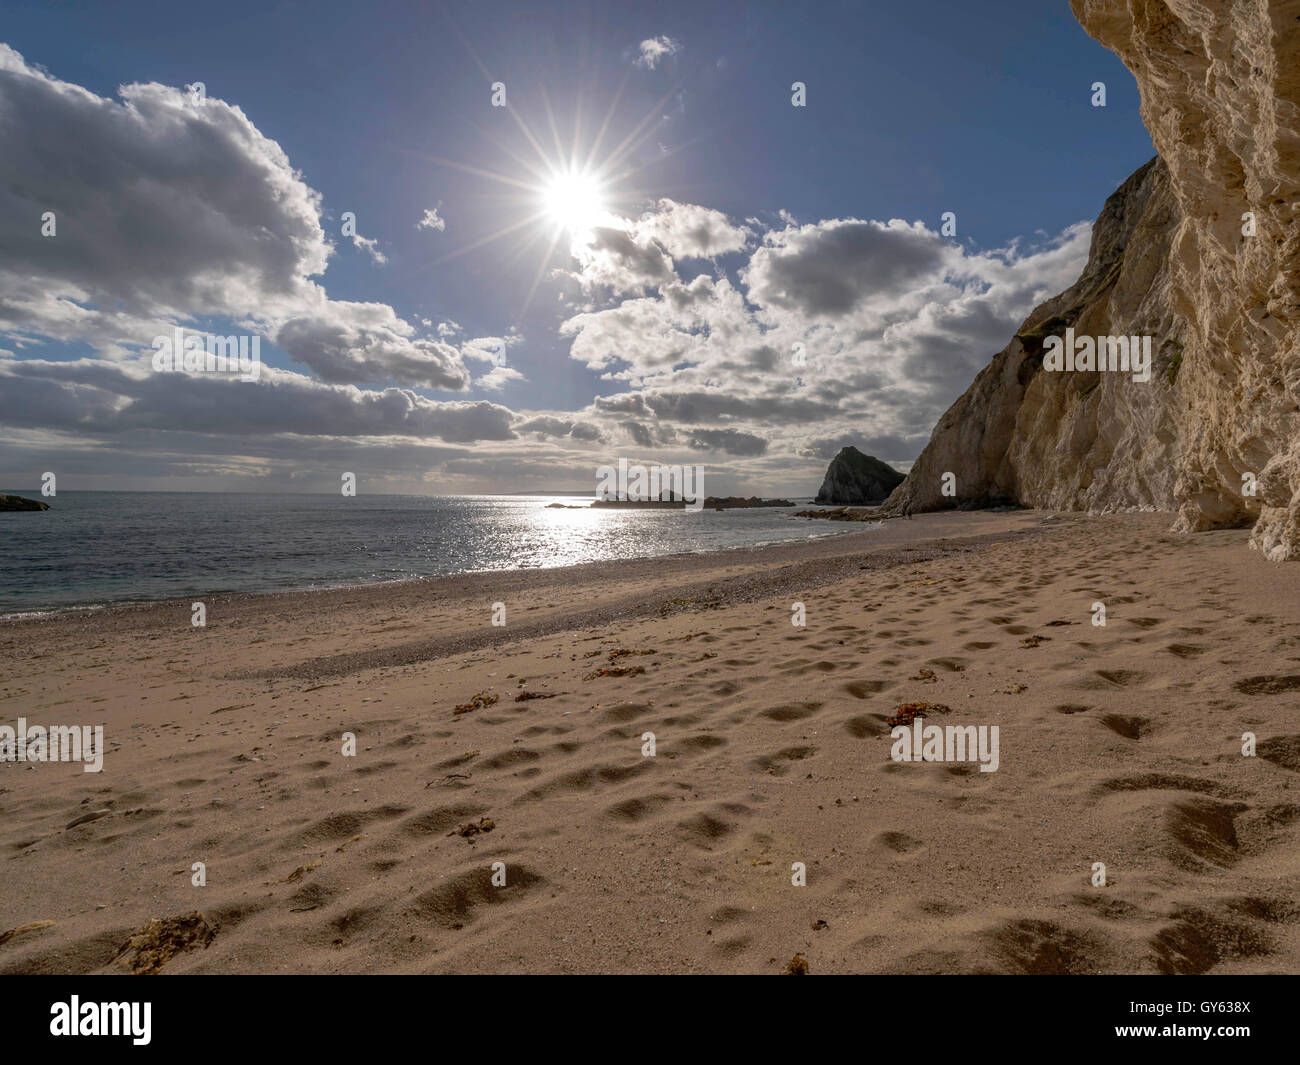 Landscape depicting the sandy shoreline at Man O'War beach on a fine summer day with Durdle Door headland in the background. Stock Photo